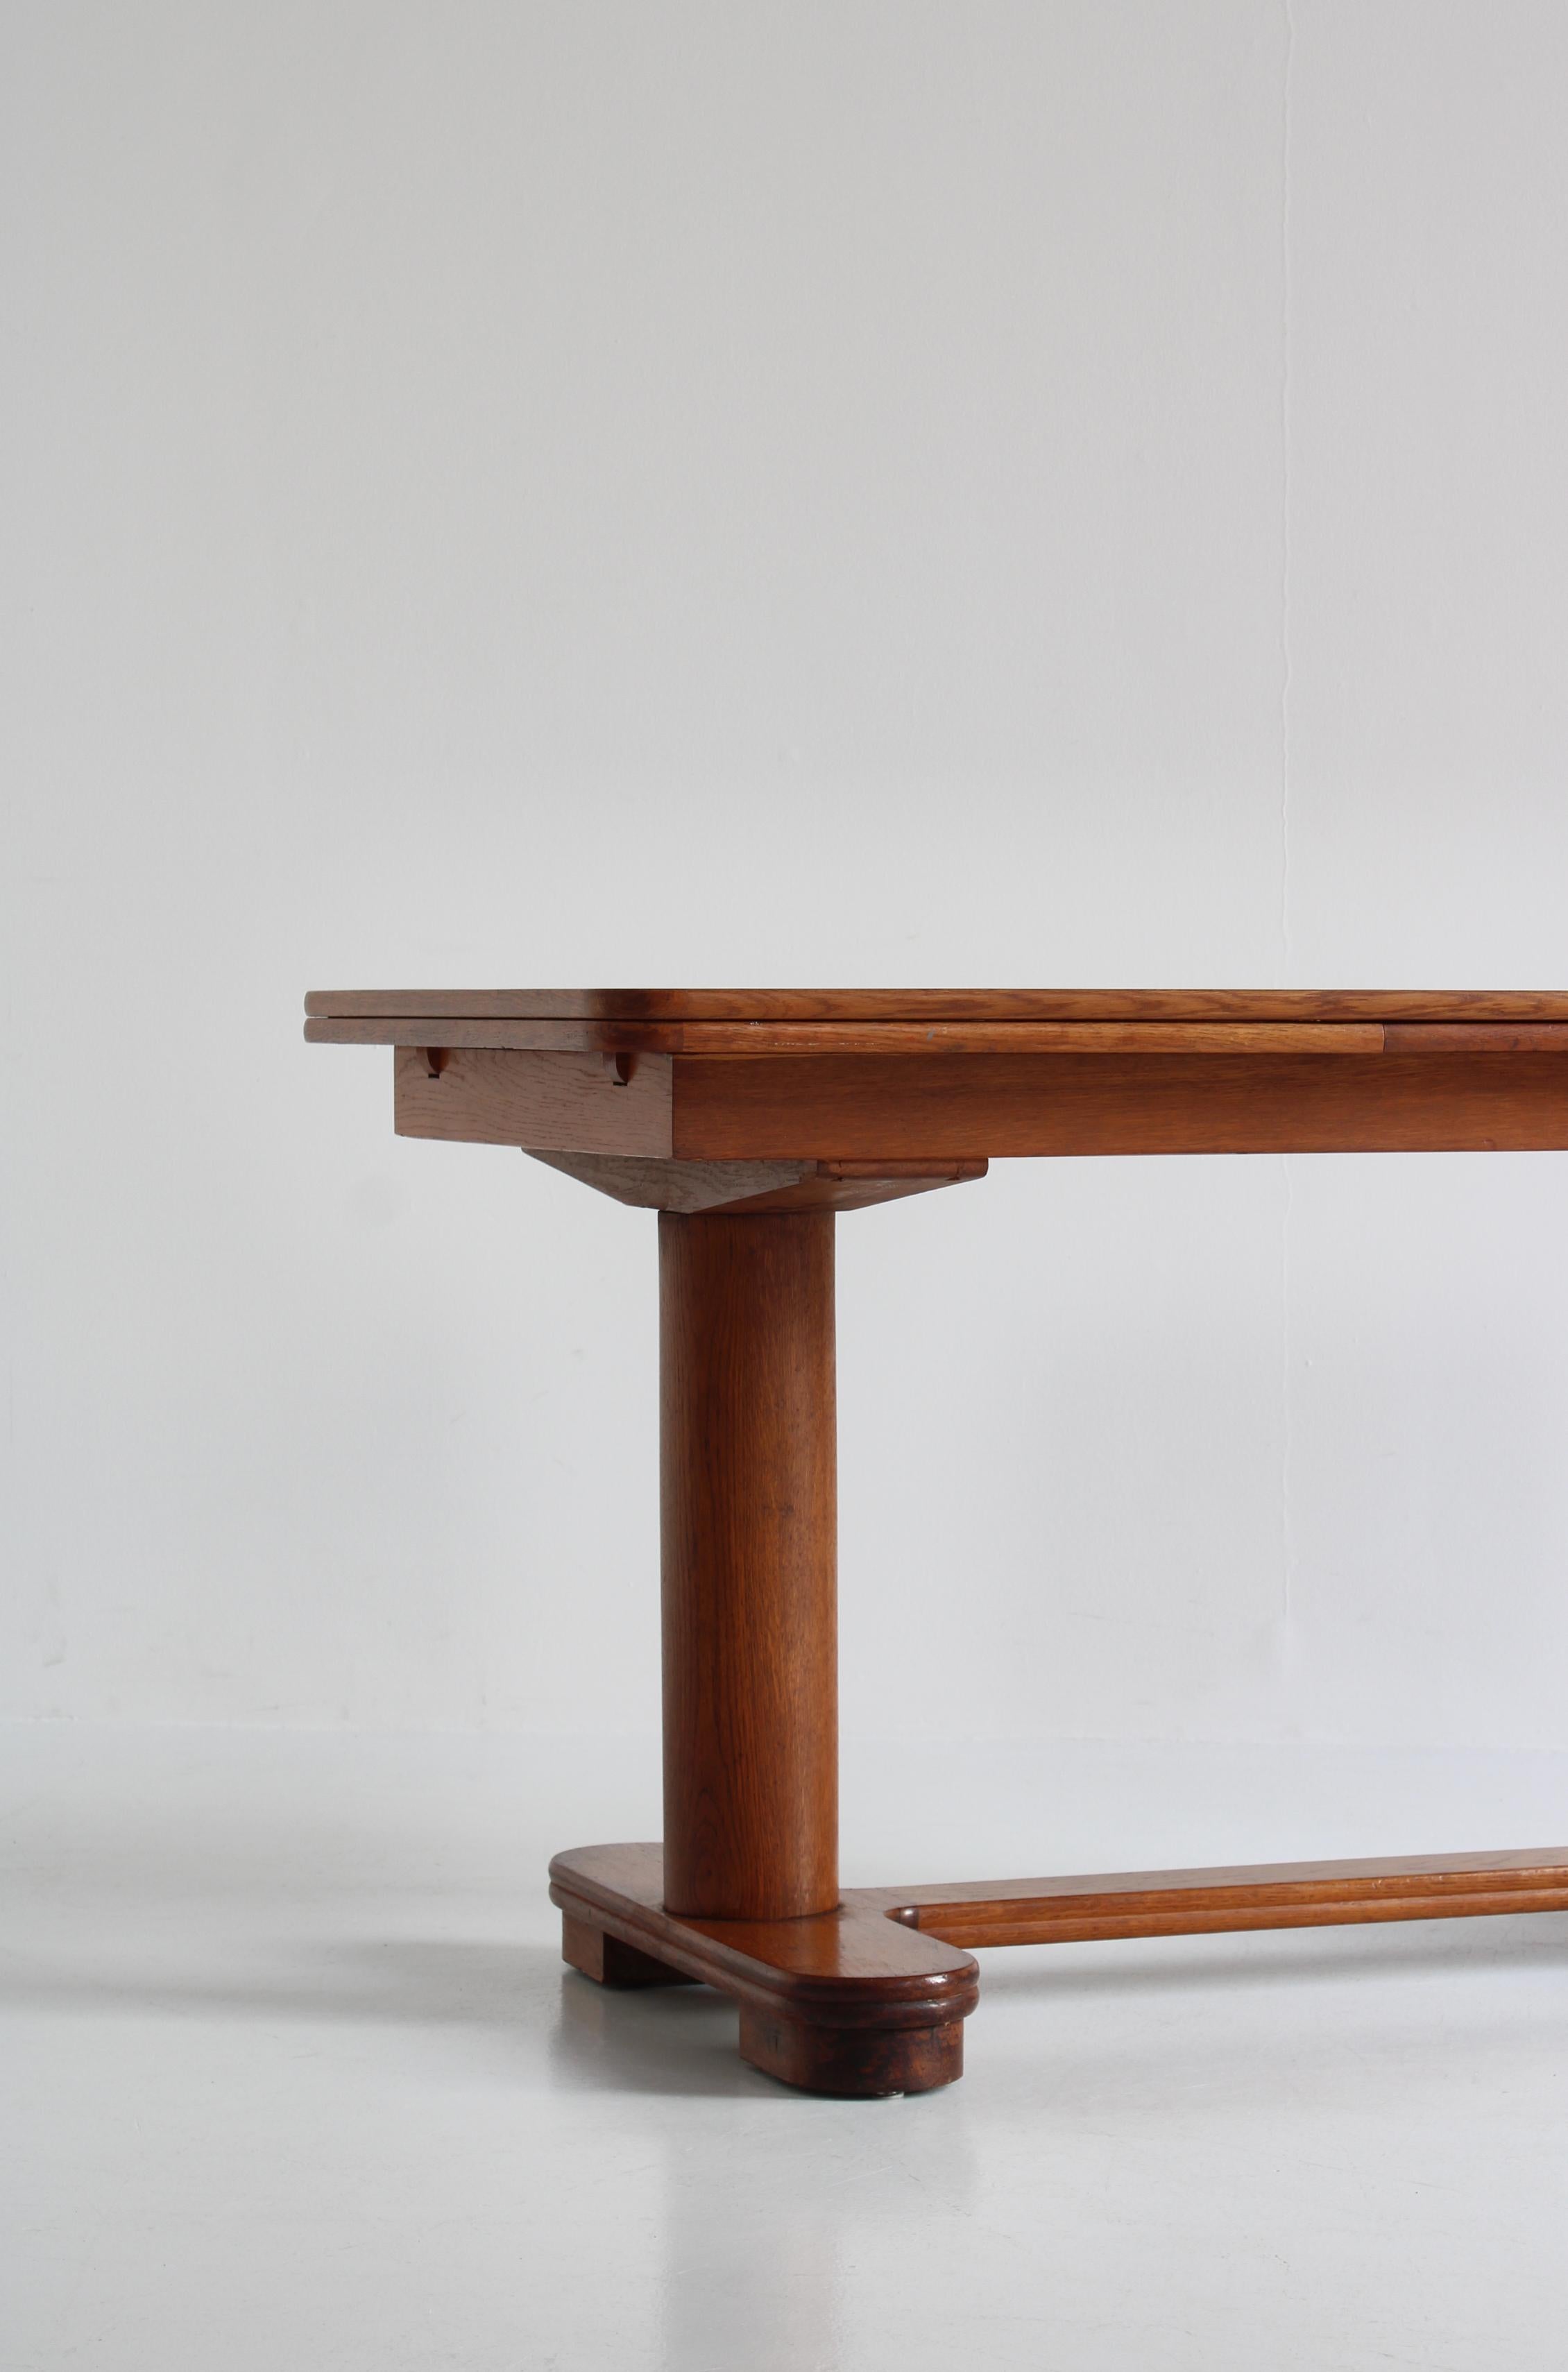 Art Deco Table by Danish Cabinetmaker in Patinated Oak, 1930s For Sale 5